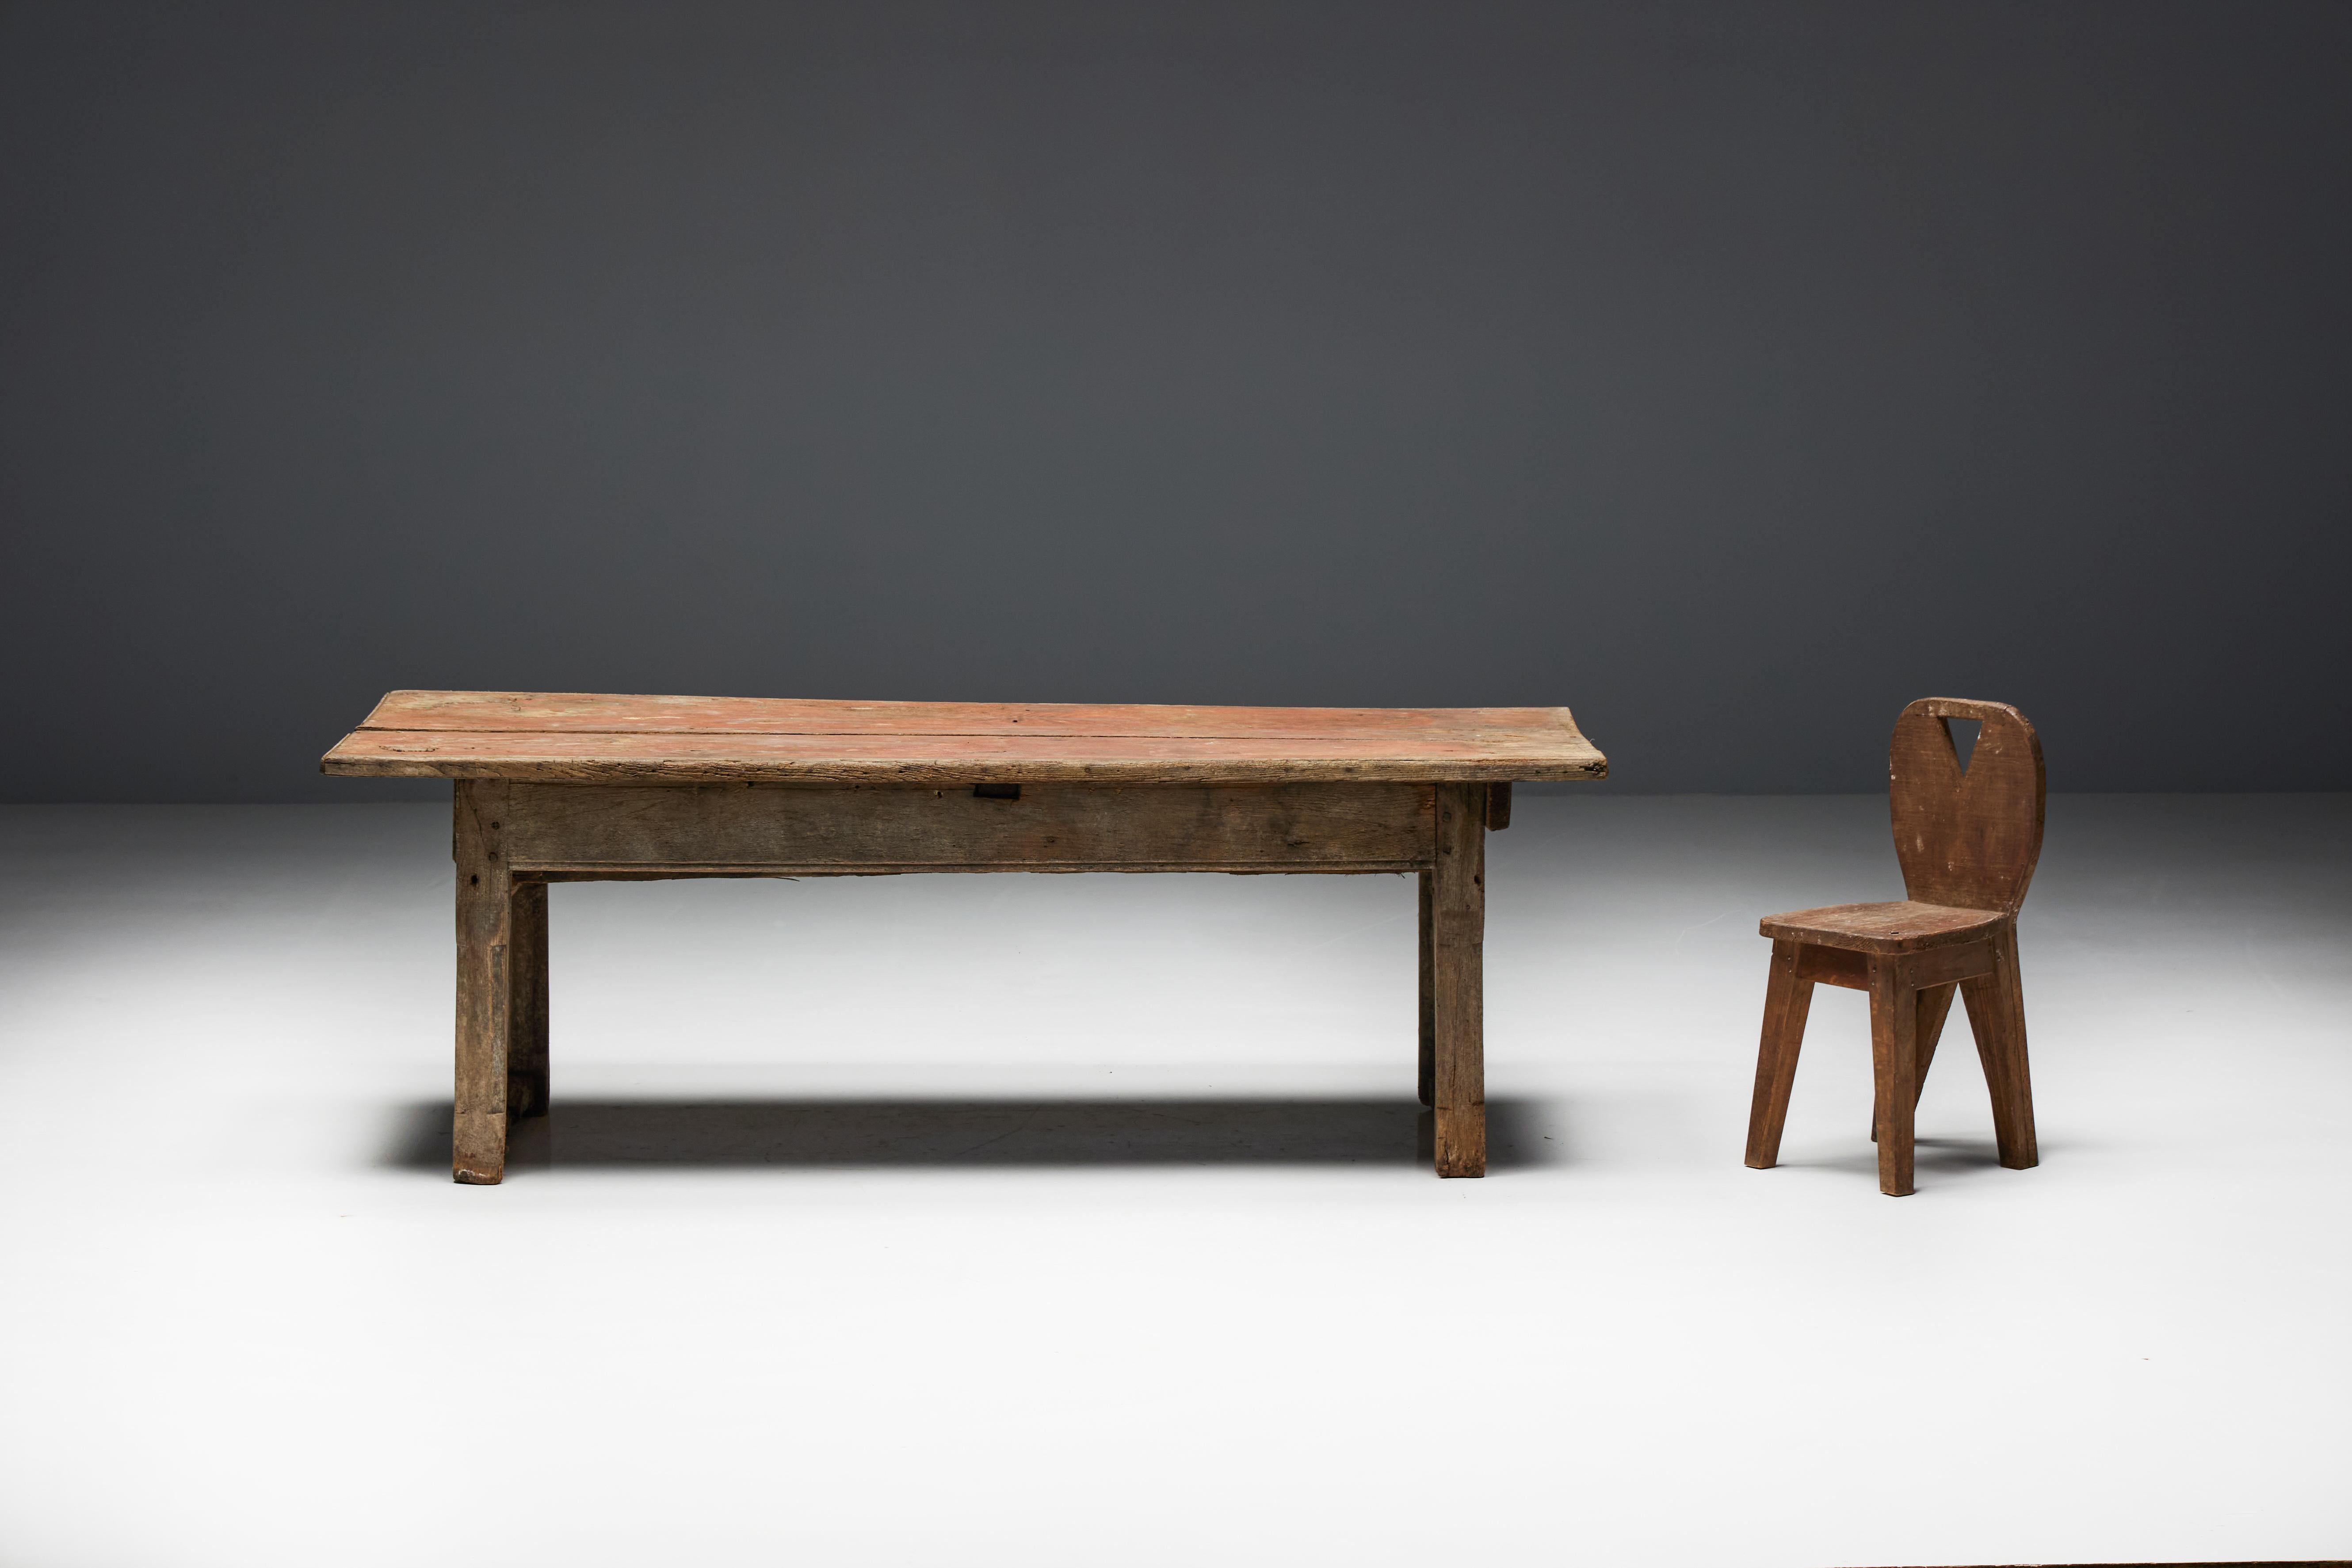 Rustic Travail Populaire Dining Table, France, Early 19th Century For Sale 6